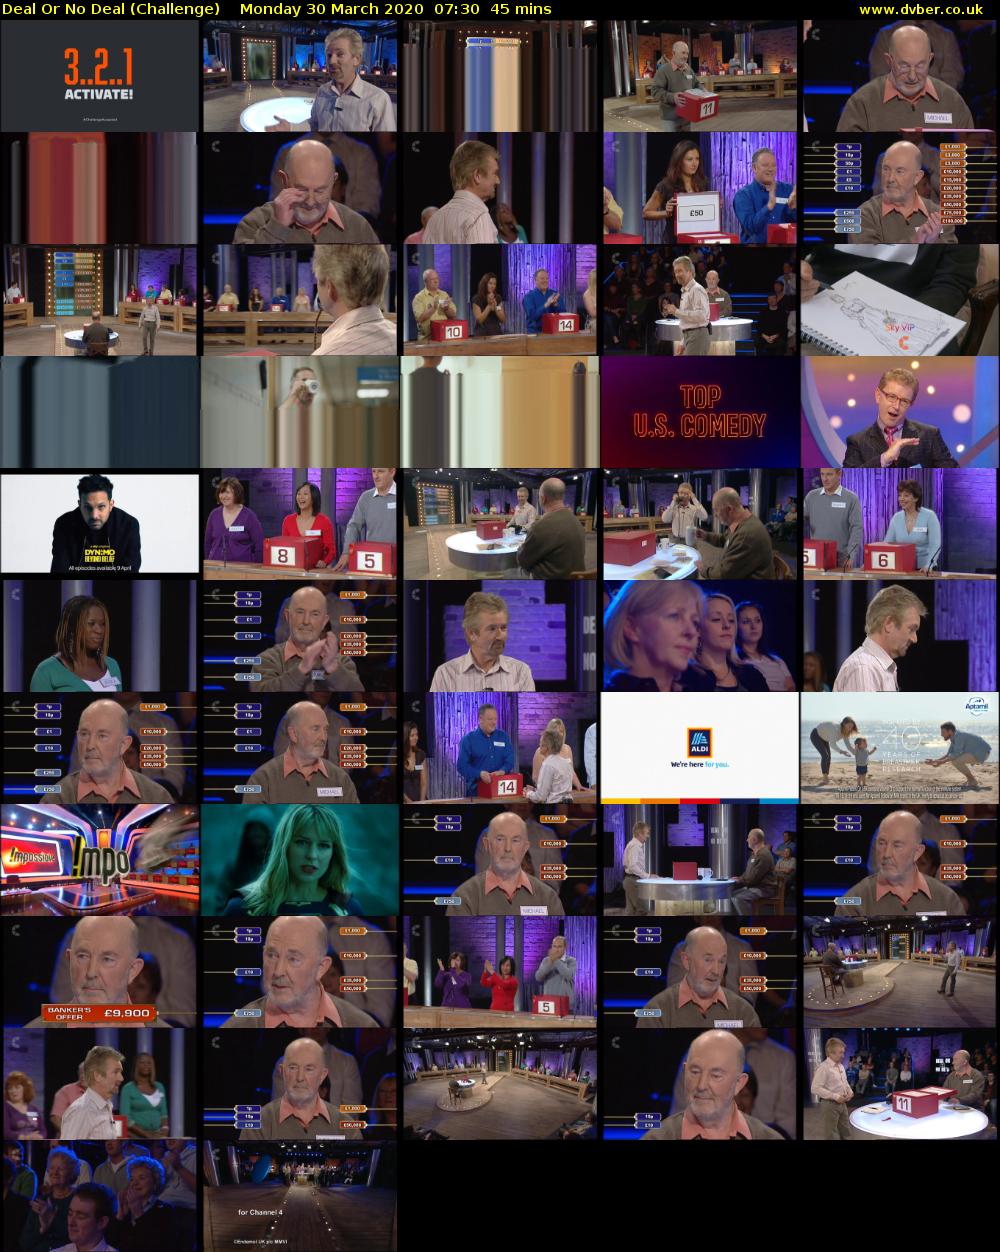 Deal Or No Deal (Challenge) Monday 30 March 2020 07:30 - 08:15